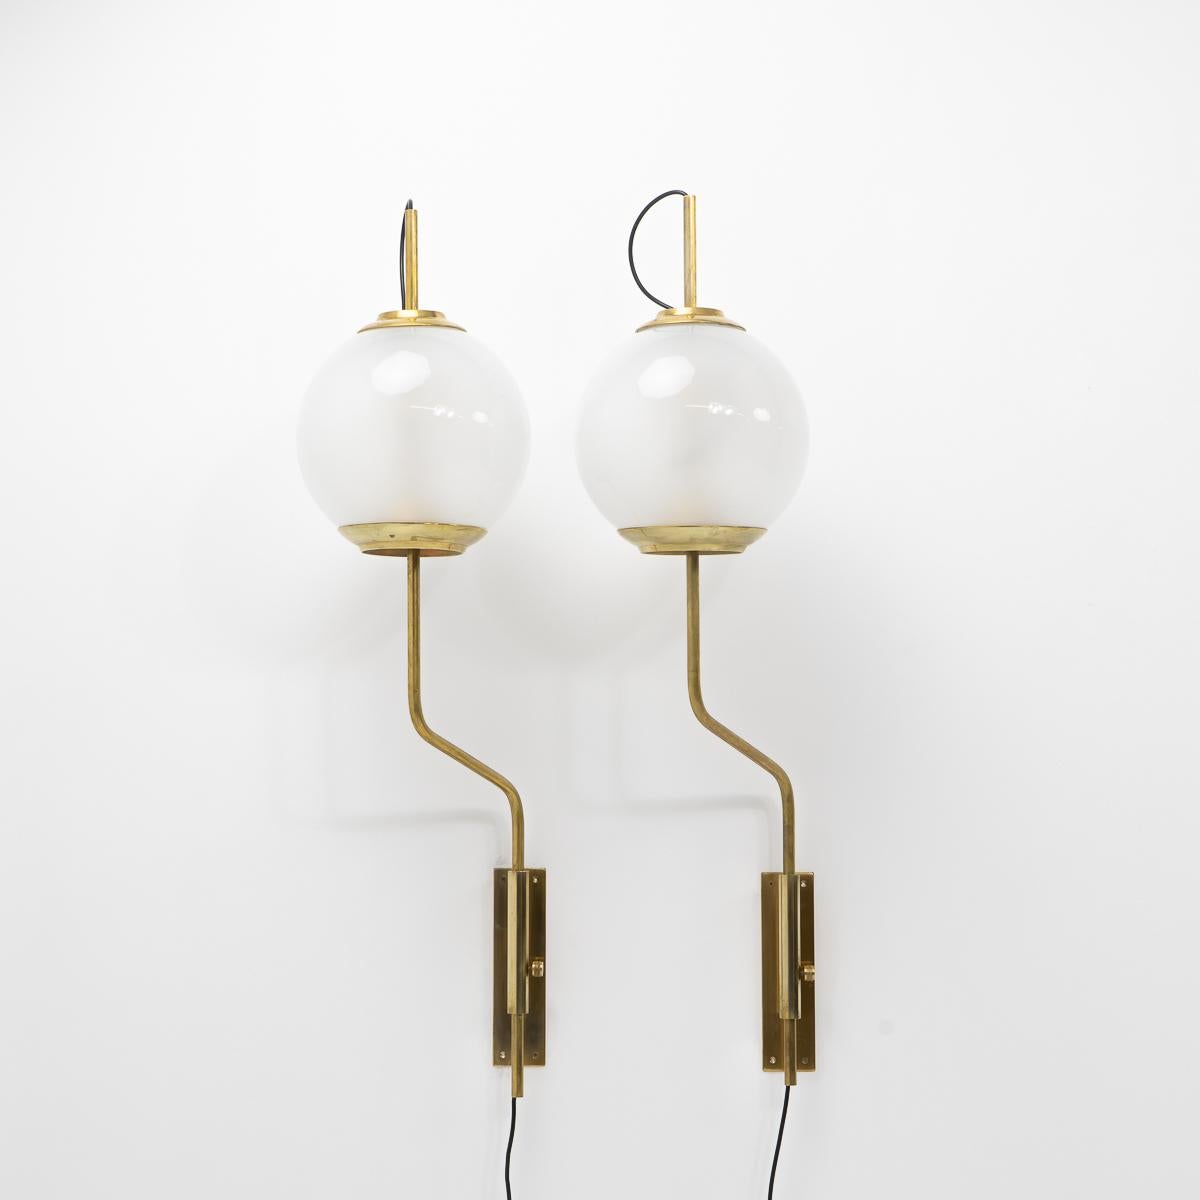 Set of two impressive adjustable LP11 “Pallone” sconces by Luigi Caccia Dominioni for Azucena originally designed in the late 1950s.

The lamps rotate and are height adjustable. Brass and opaline glass. 


Condition: Good vintage condition, signs of